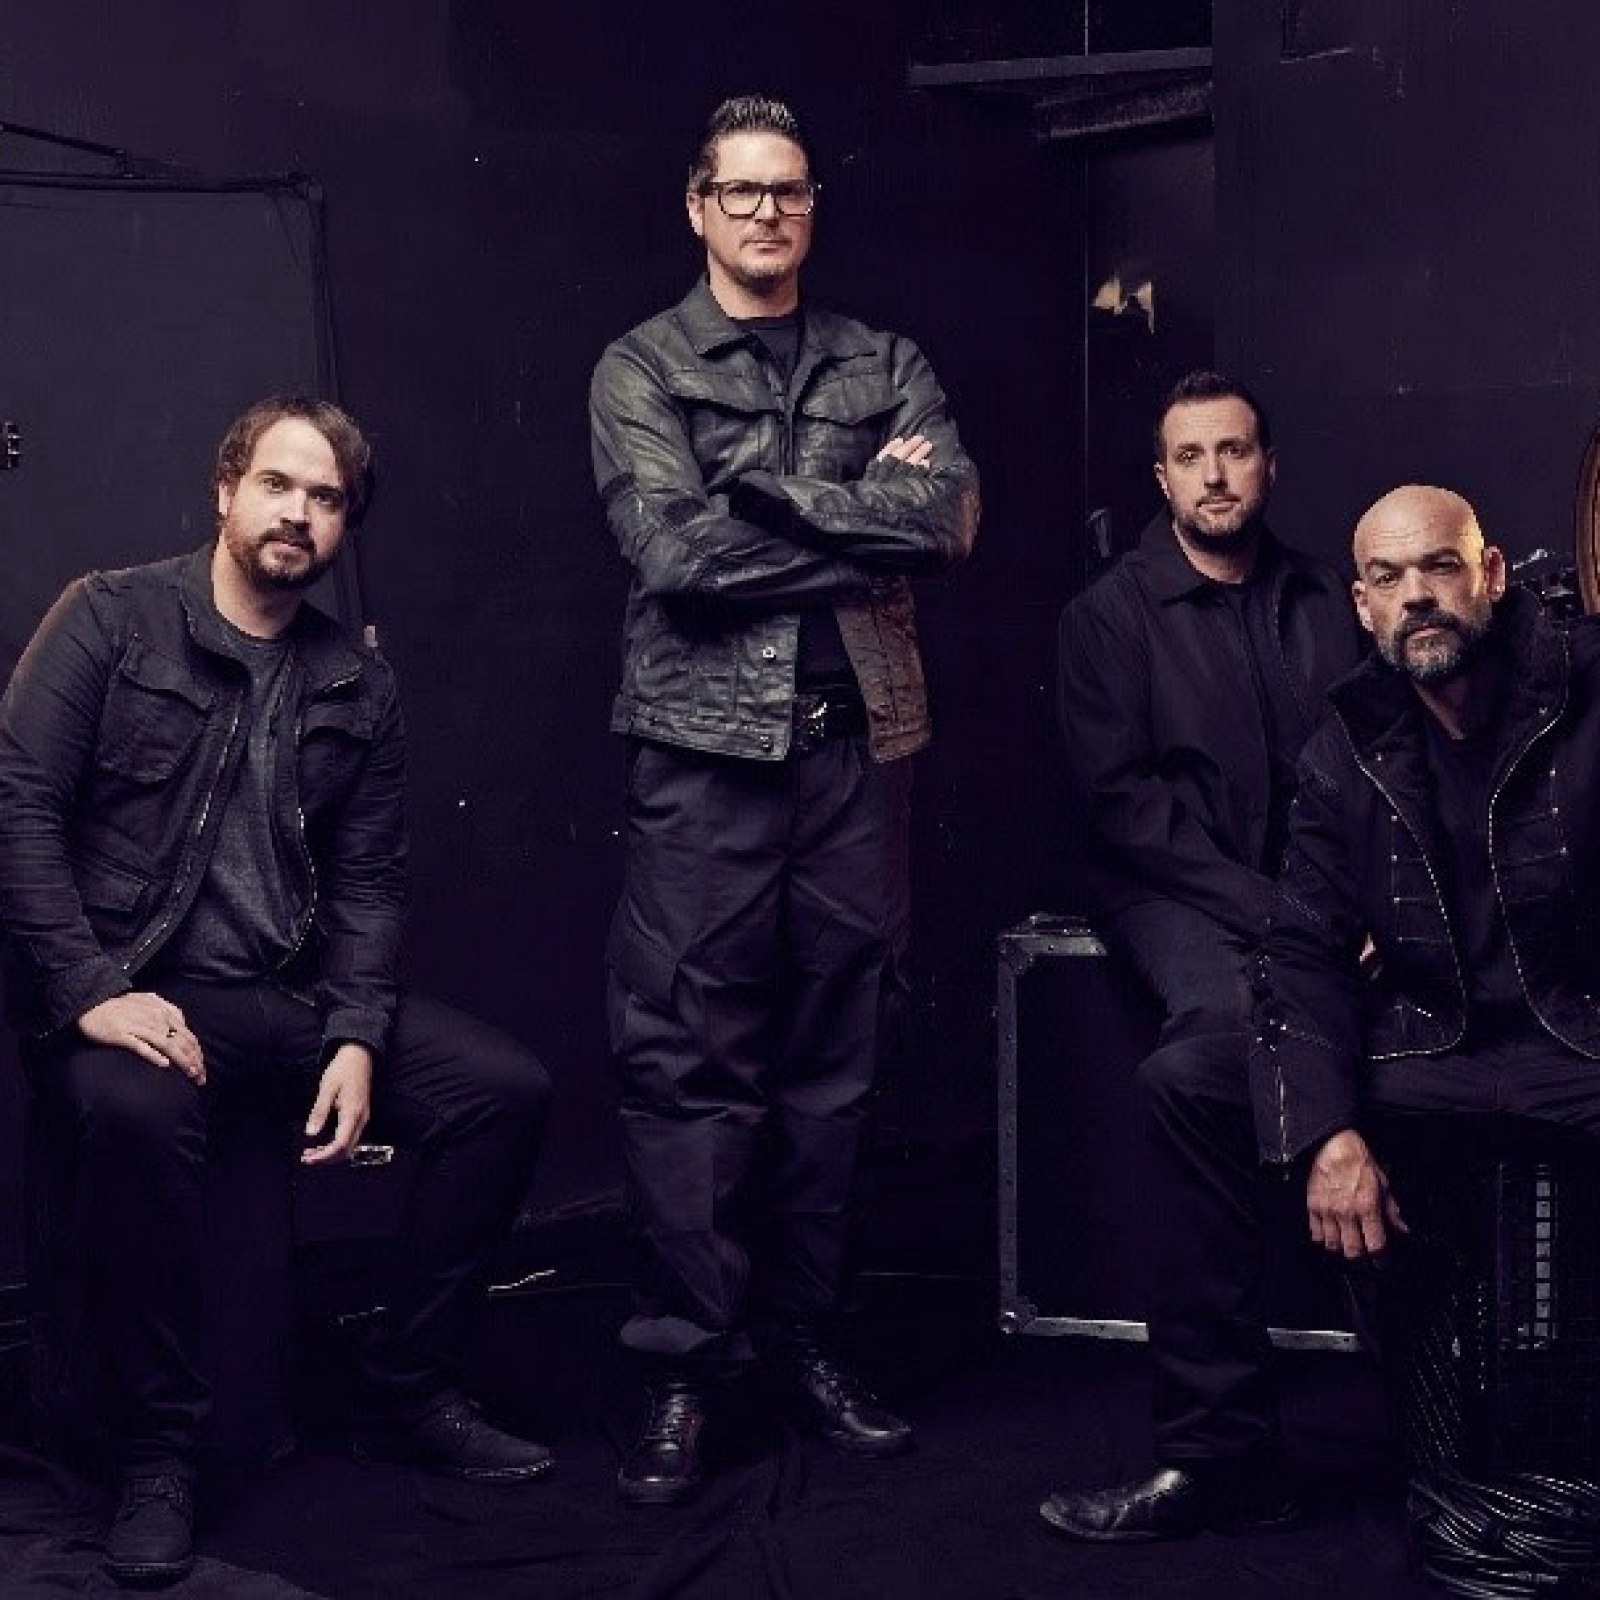 zak bagans halloween special 2020 Ghost Adventures Crew To Investigate Real Conjuring House In 2019 Halloween Special zak bagans halloween special 2020